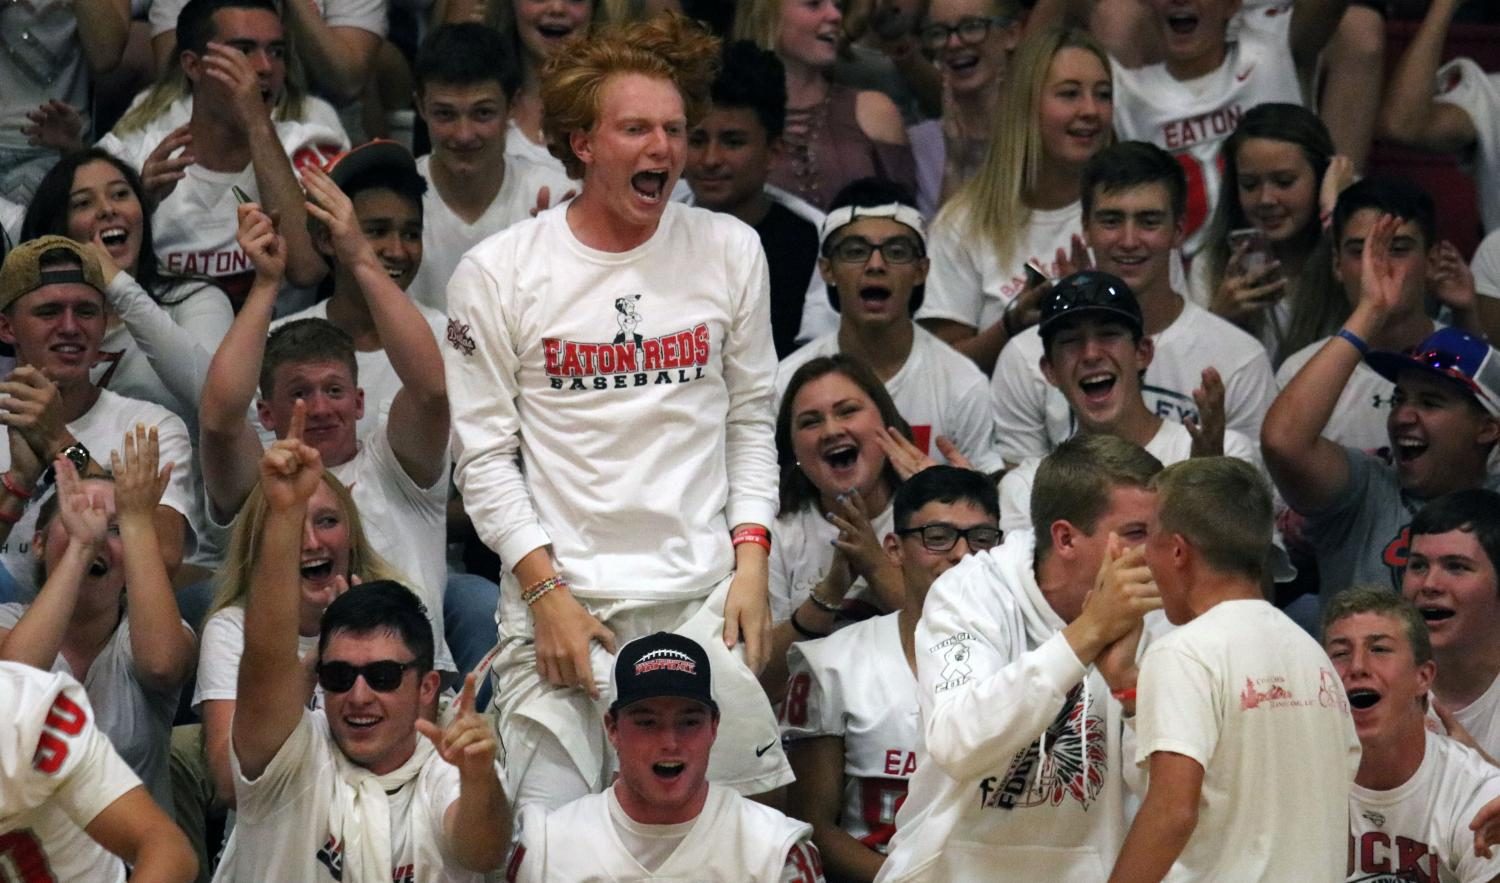 With all students dressed for a white-out, CJ Baskowski (18) jumps out of his seat to celebrate a Ma